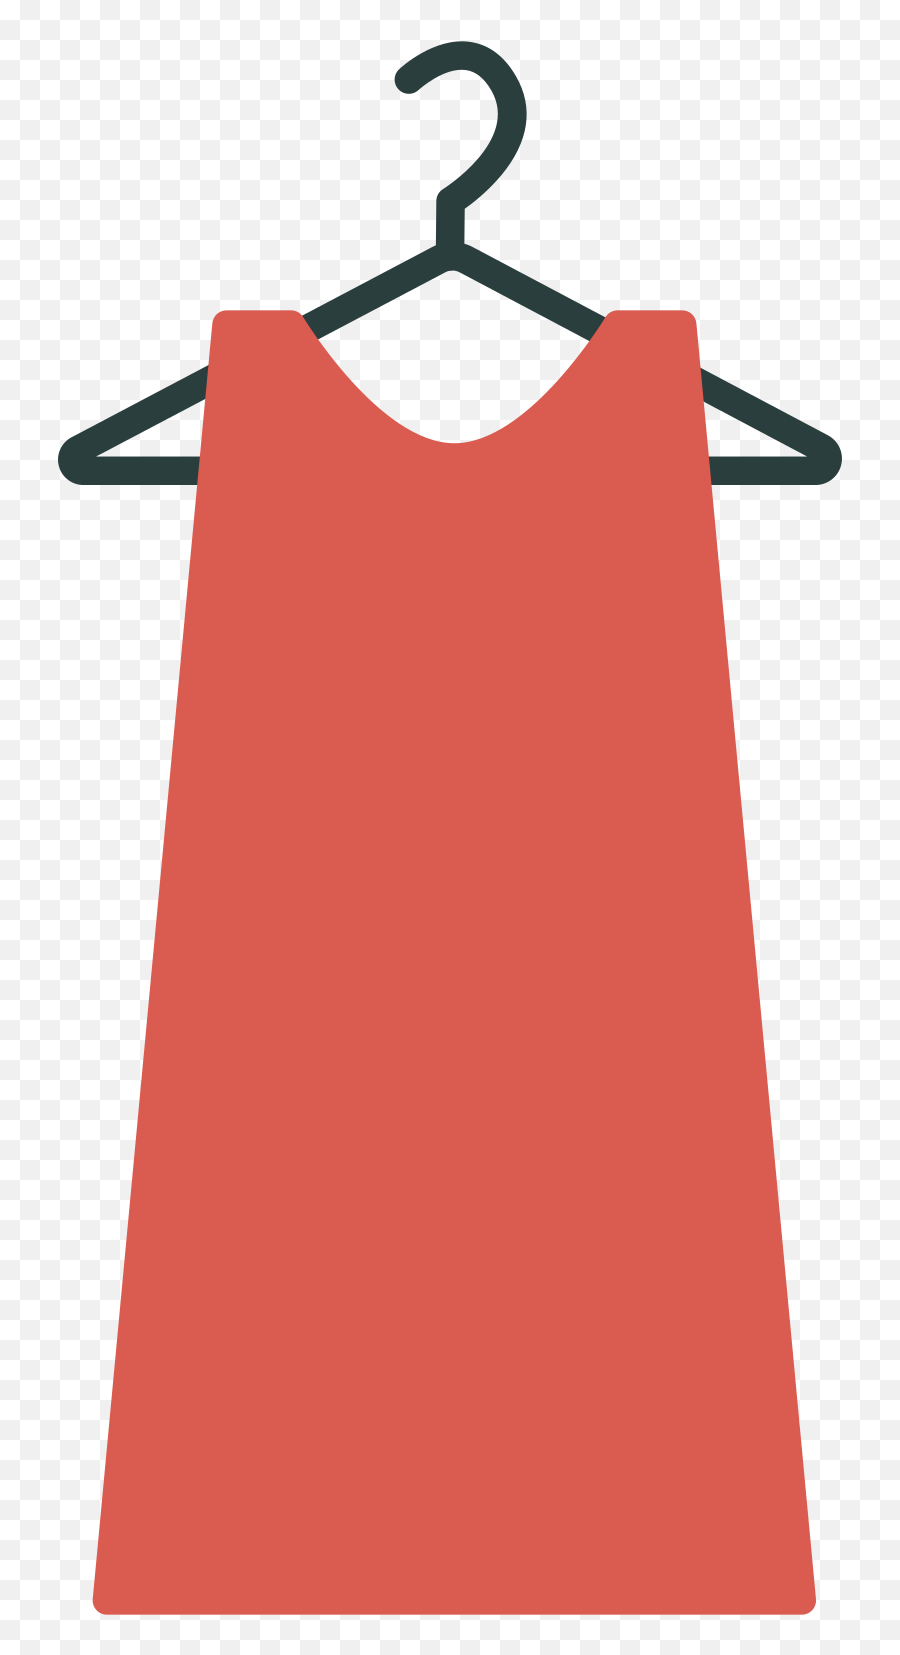 Hanger With Dress Illustration In Png Svg - Sleeveless,Hanger Vector Icon